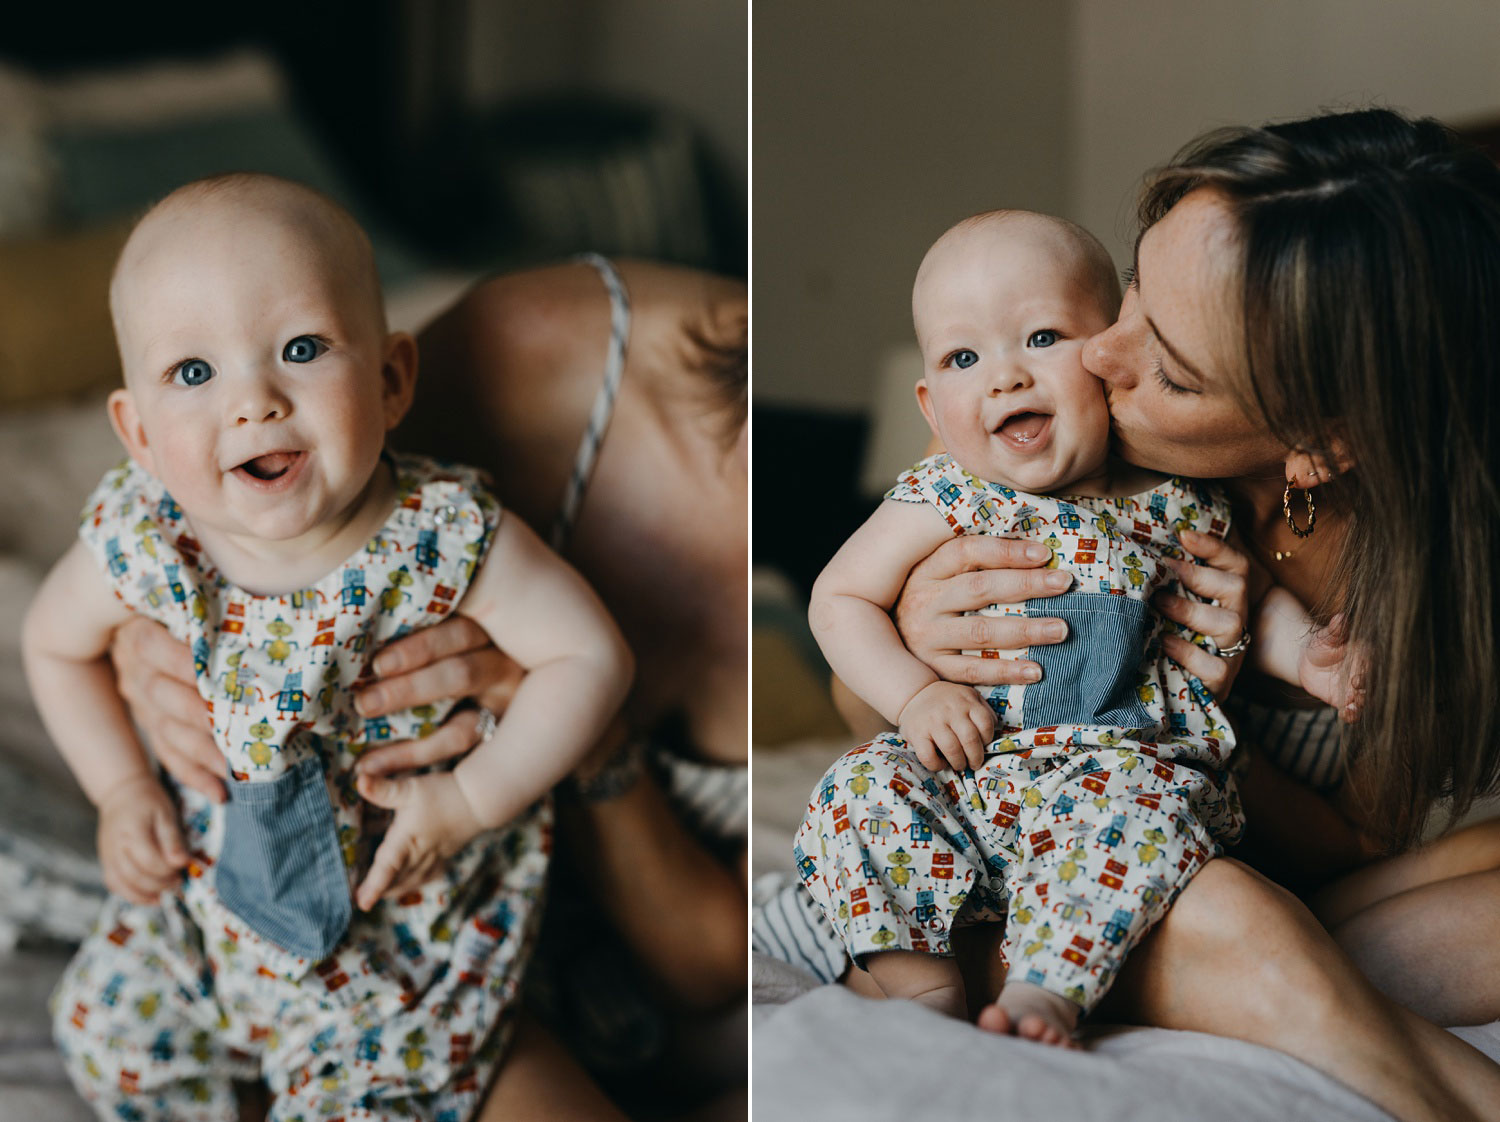 Copenhagen family photographer captures a mother and her baby together at home 